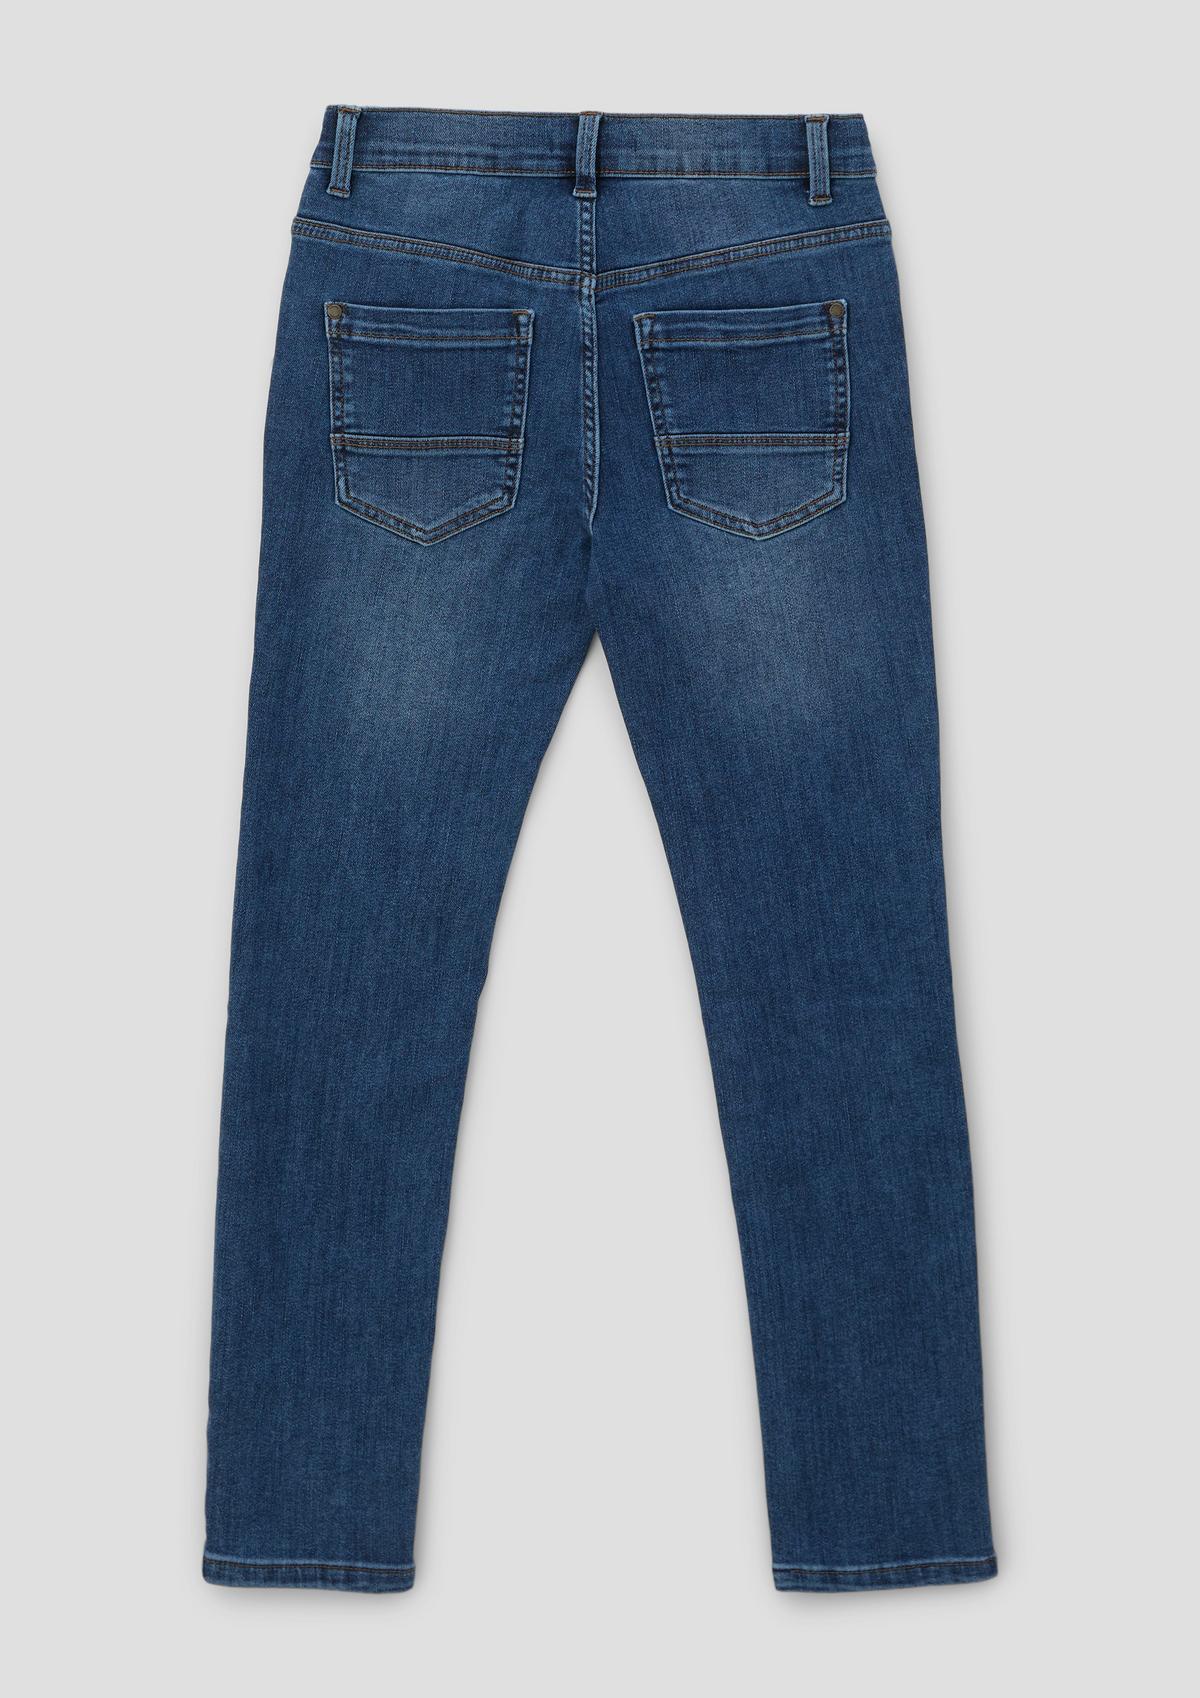 s.Oliver Seattle jeans / slim fit / mid rise / skinny leg